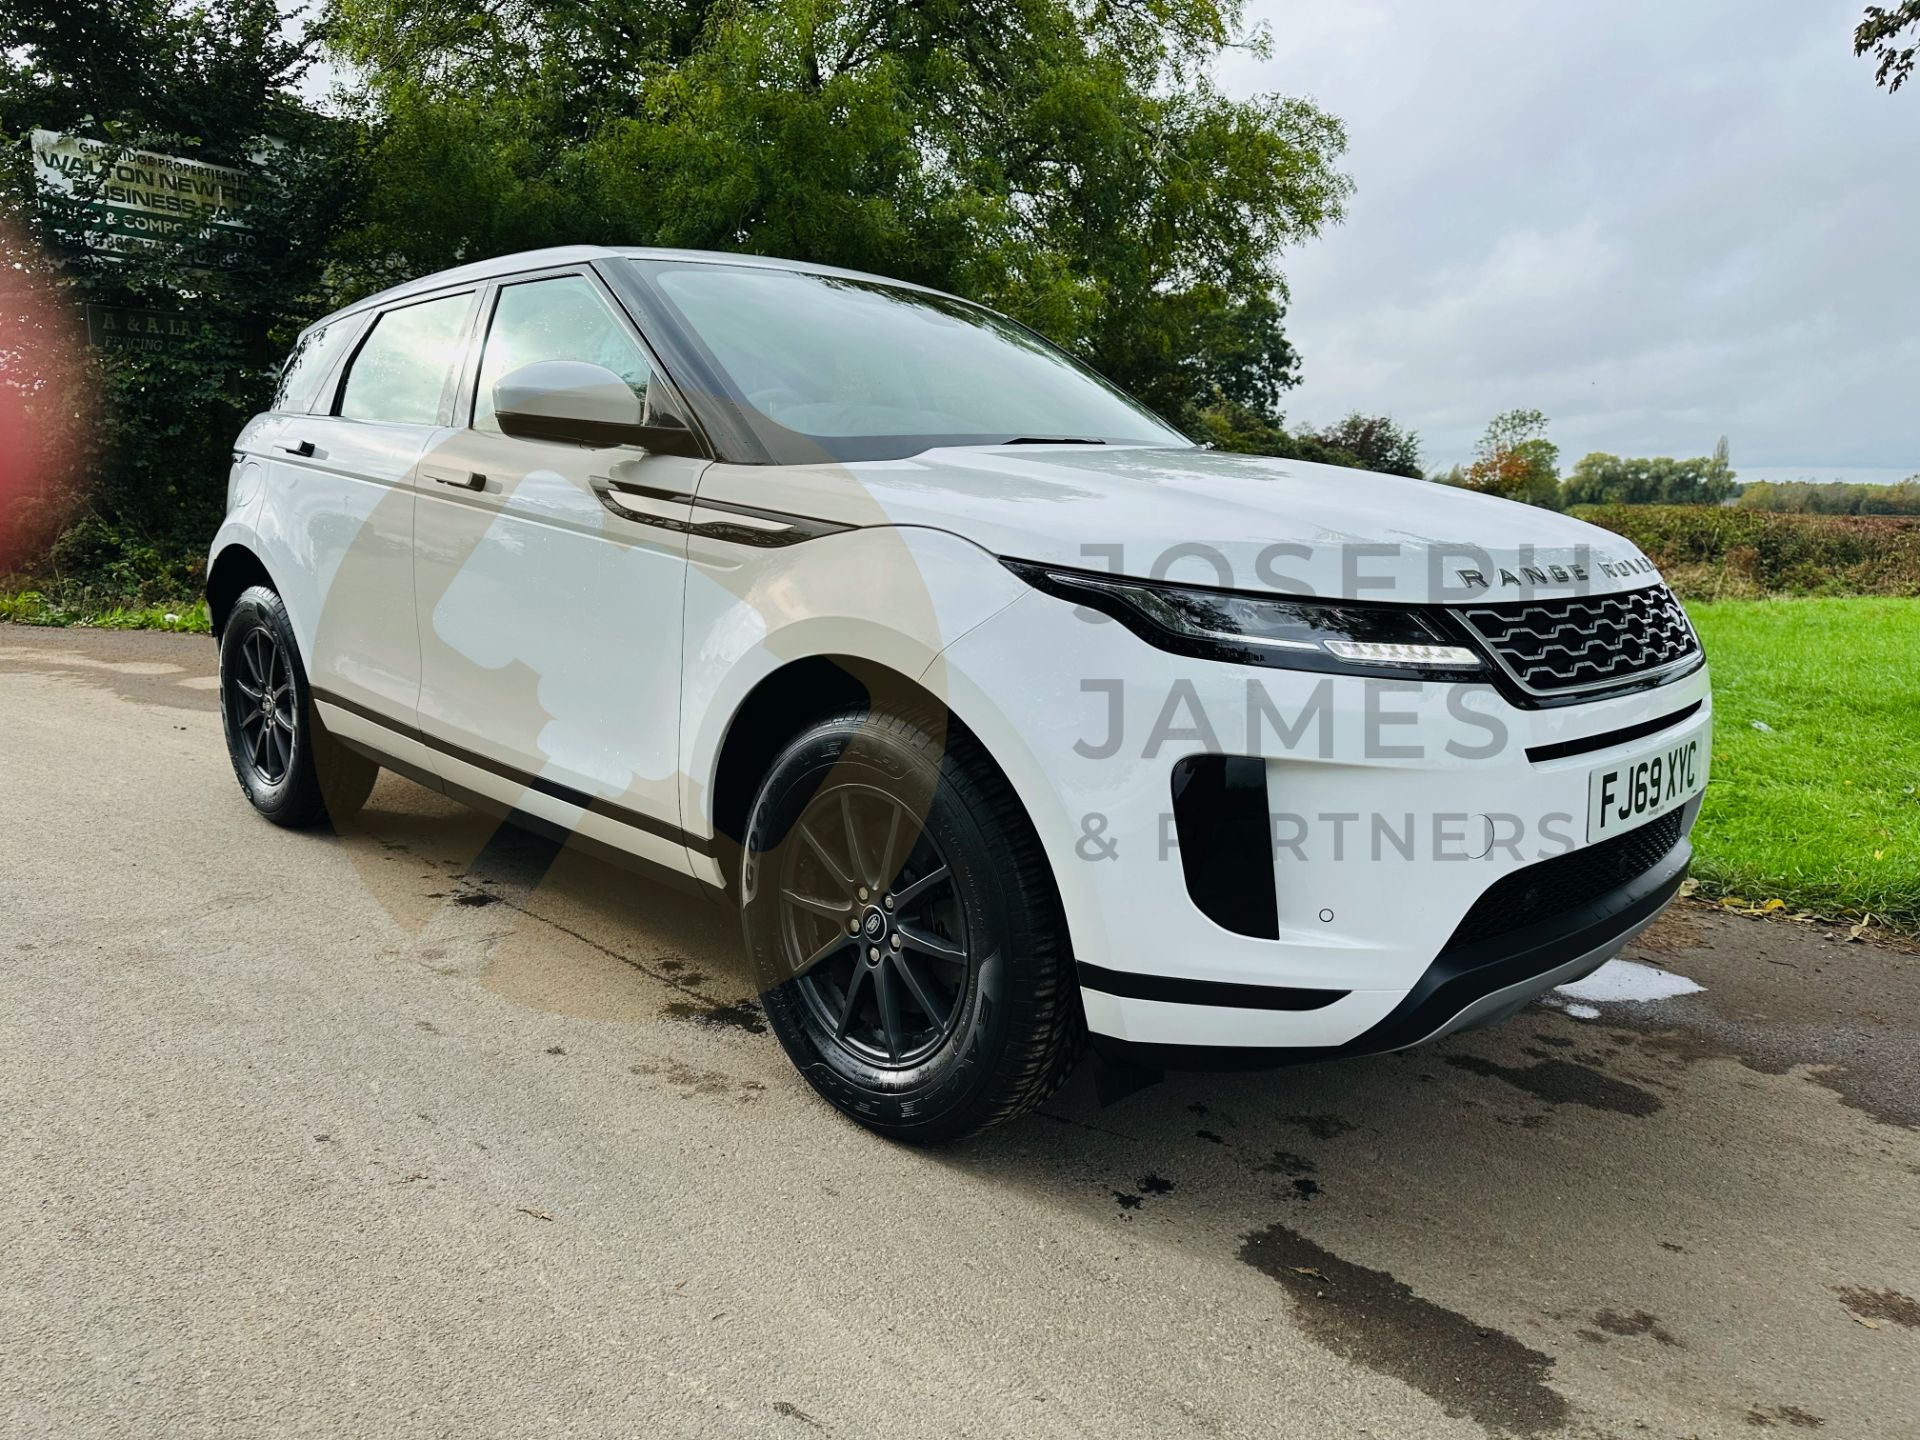 (ON SALE) LAND ROVER RANGE ROVER EVOQUE 2.0d AUTO-START STOP (2020 MODEL) ONLY 33K MILES FROM NEW - Image 2 of 41